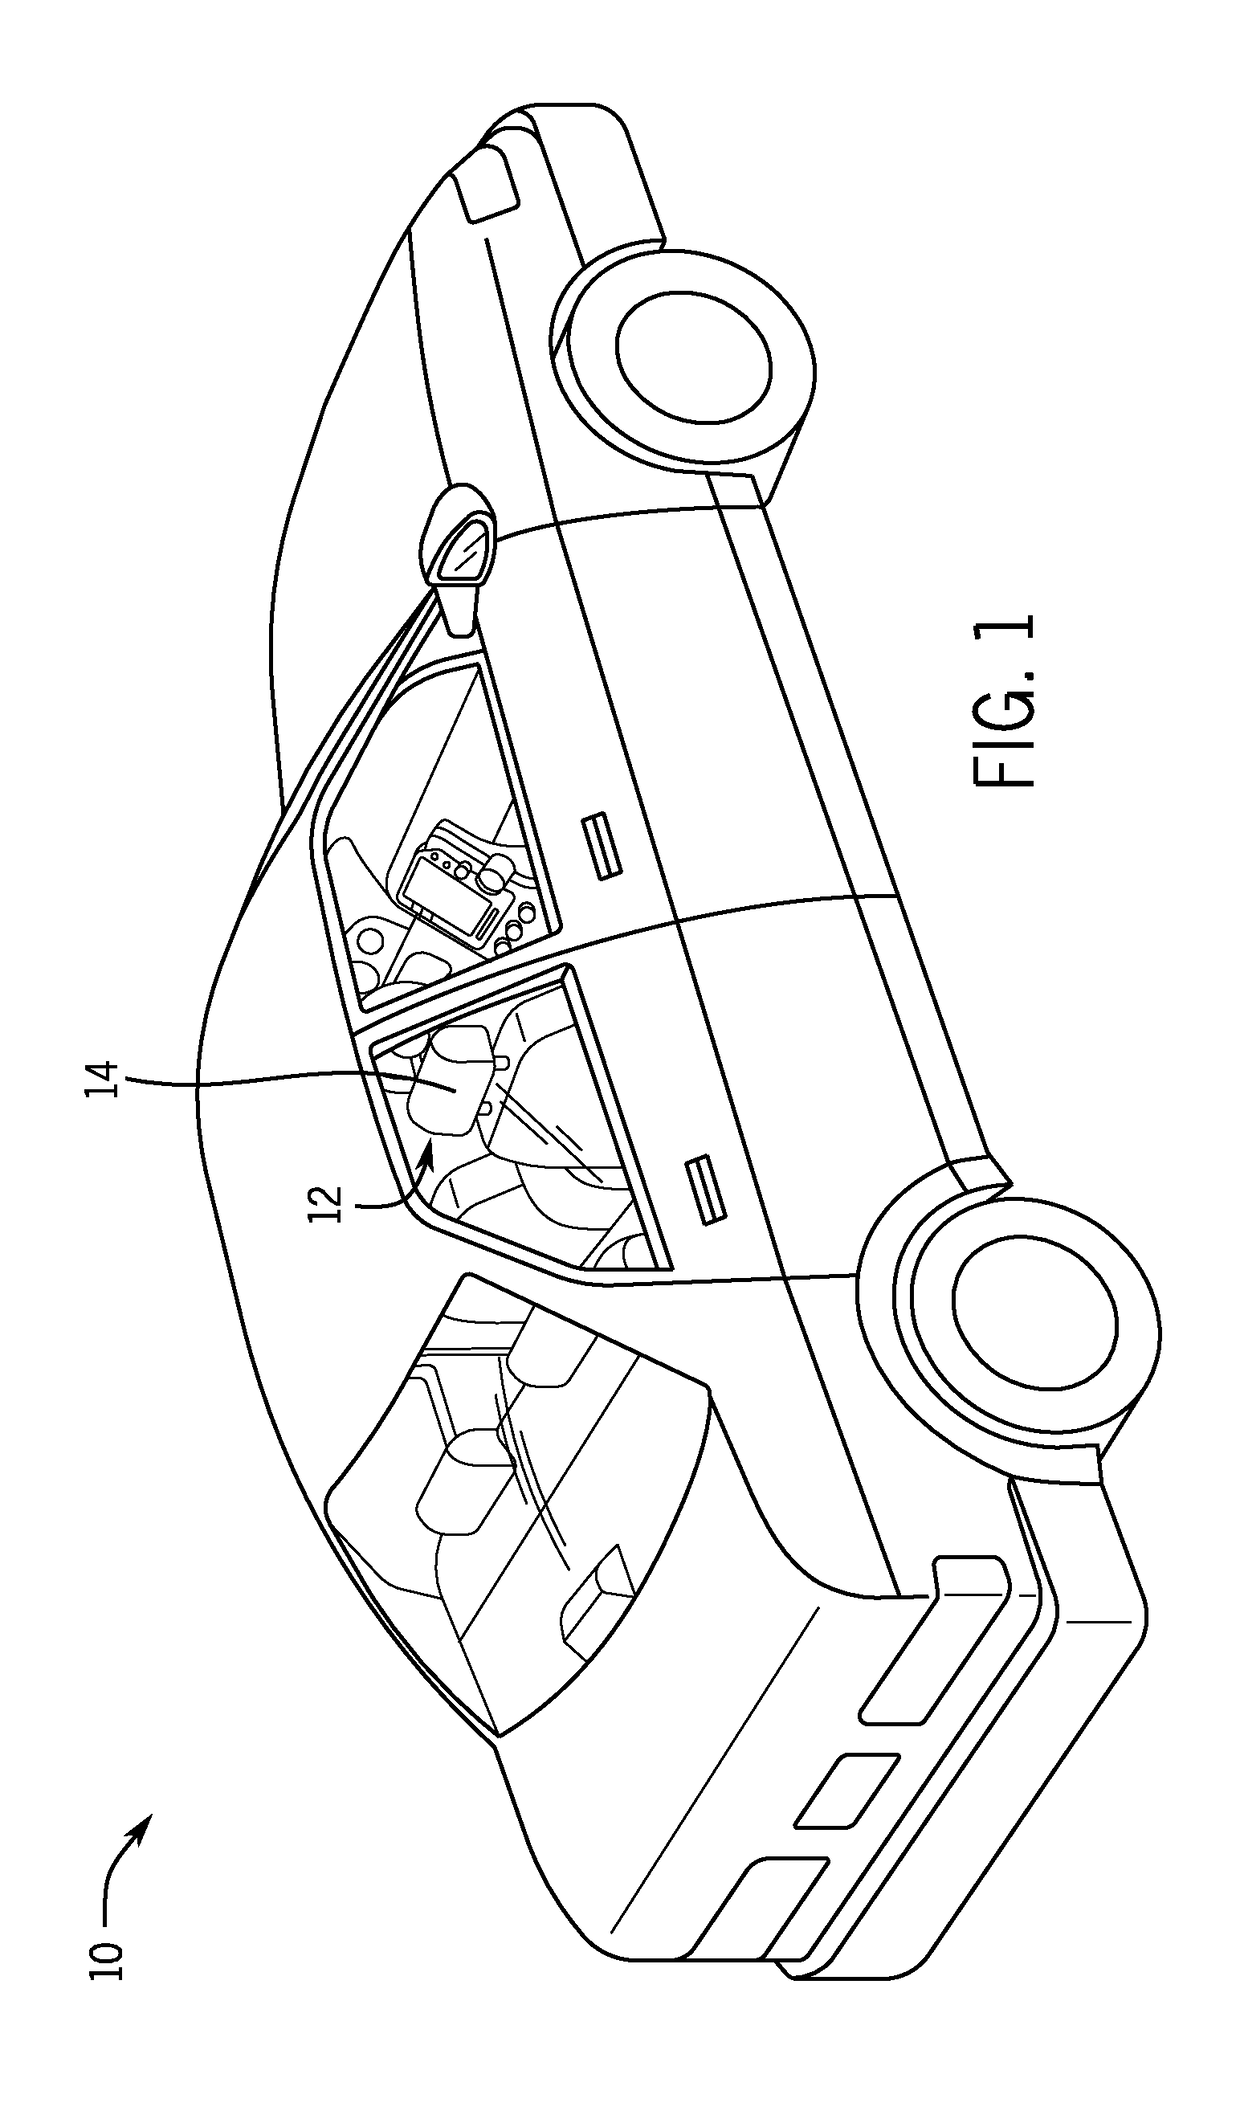 Vehicle seat recliner assembly